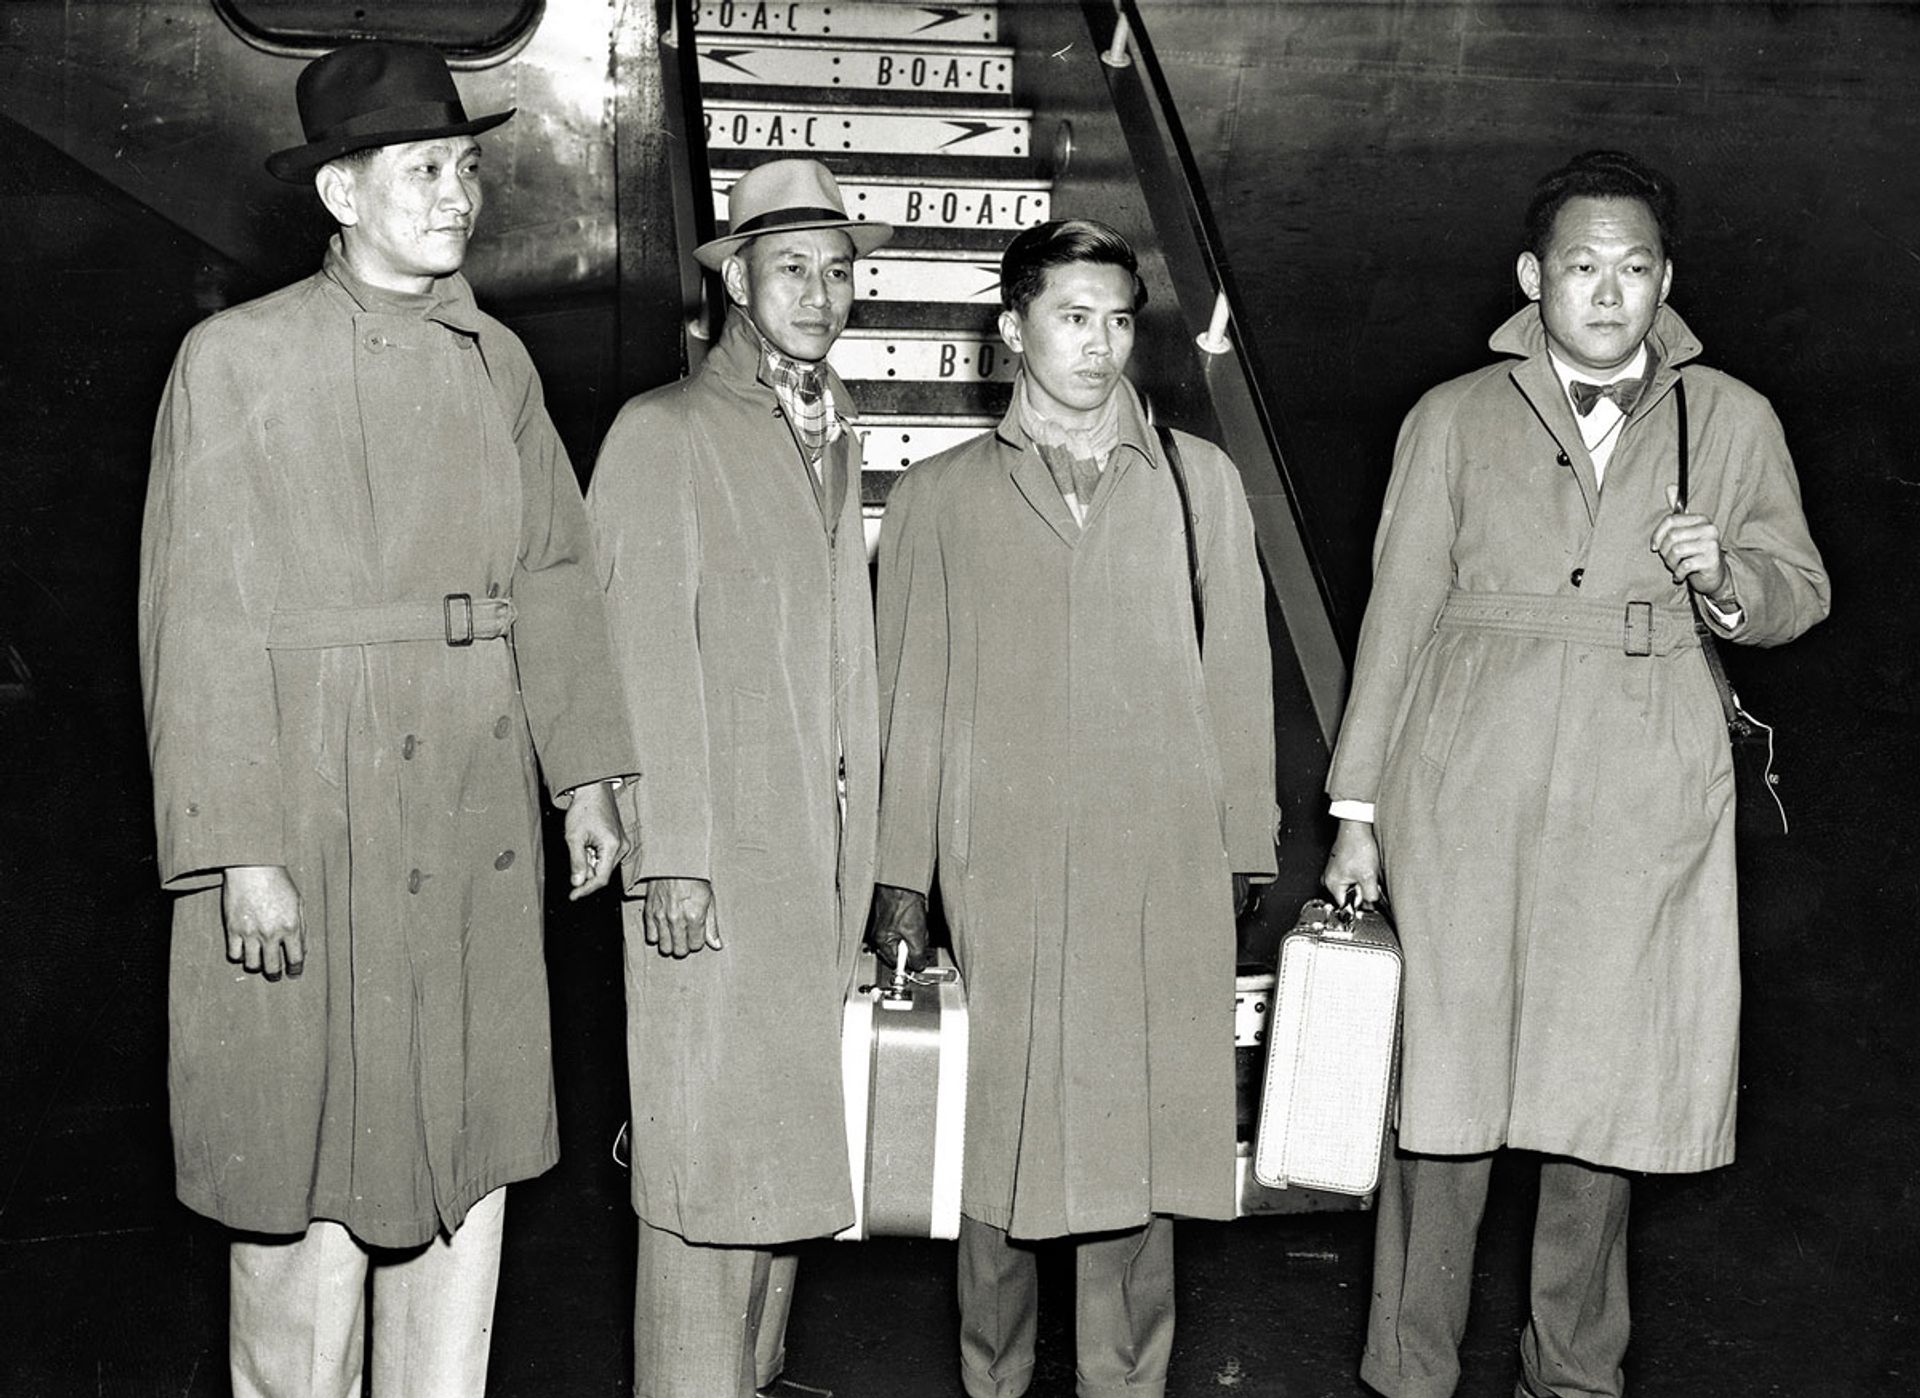 Headed for the first Merdeka talks for Singapore’s independence in April 1956. (From left) Mr Seah Peng Chuan from the Labour Front, Mr Lim Choon Mong from the Liberal Socialist Party, and Mr Lim Chin Siong and Mr Lee from the People’s Action Party. Source: British Overseas Airways Corporation